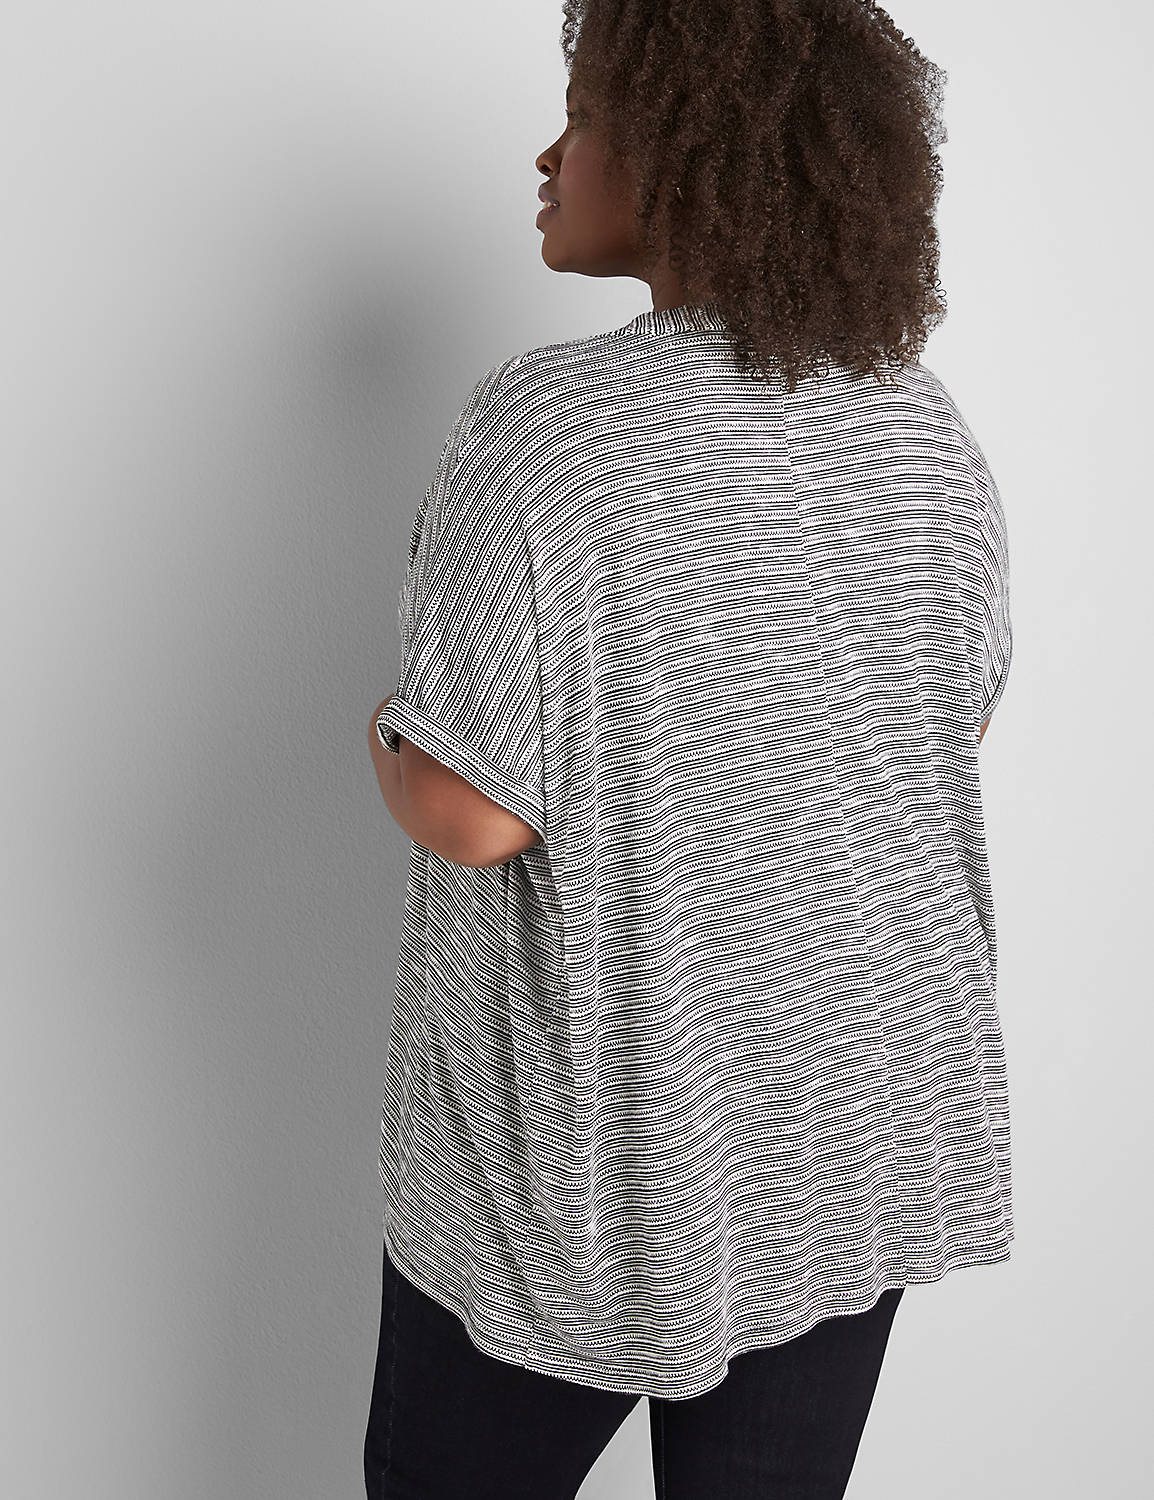 Cuffed Dolman-Sleeve Overpiece Product Image 2